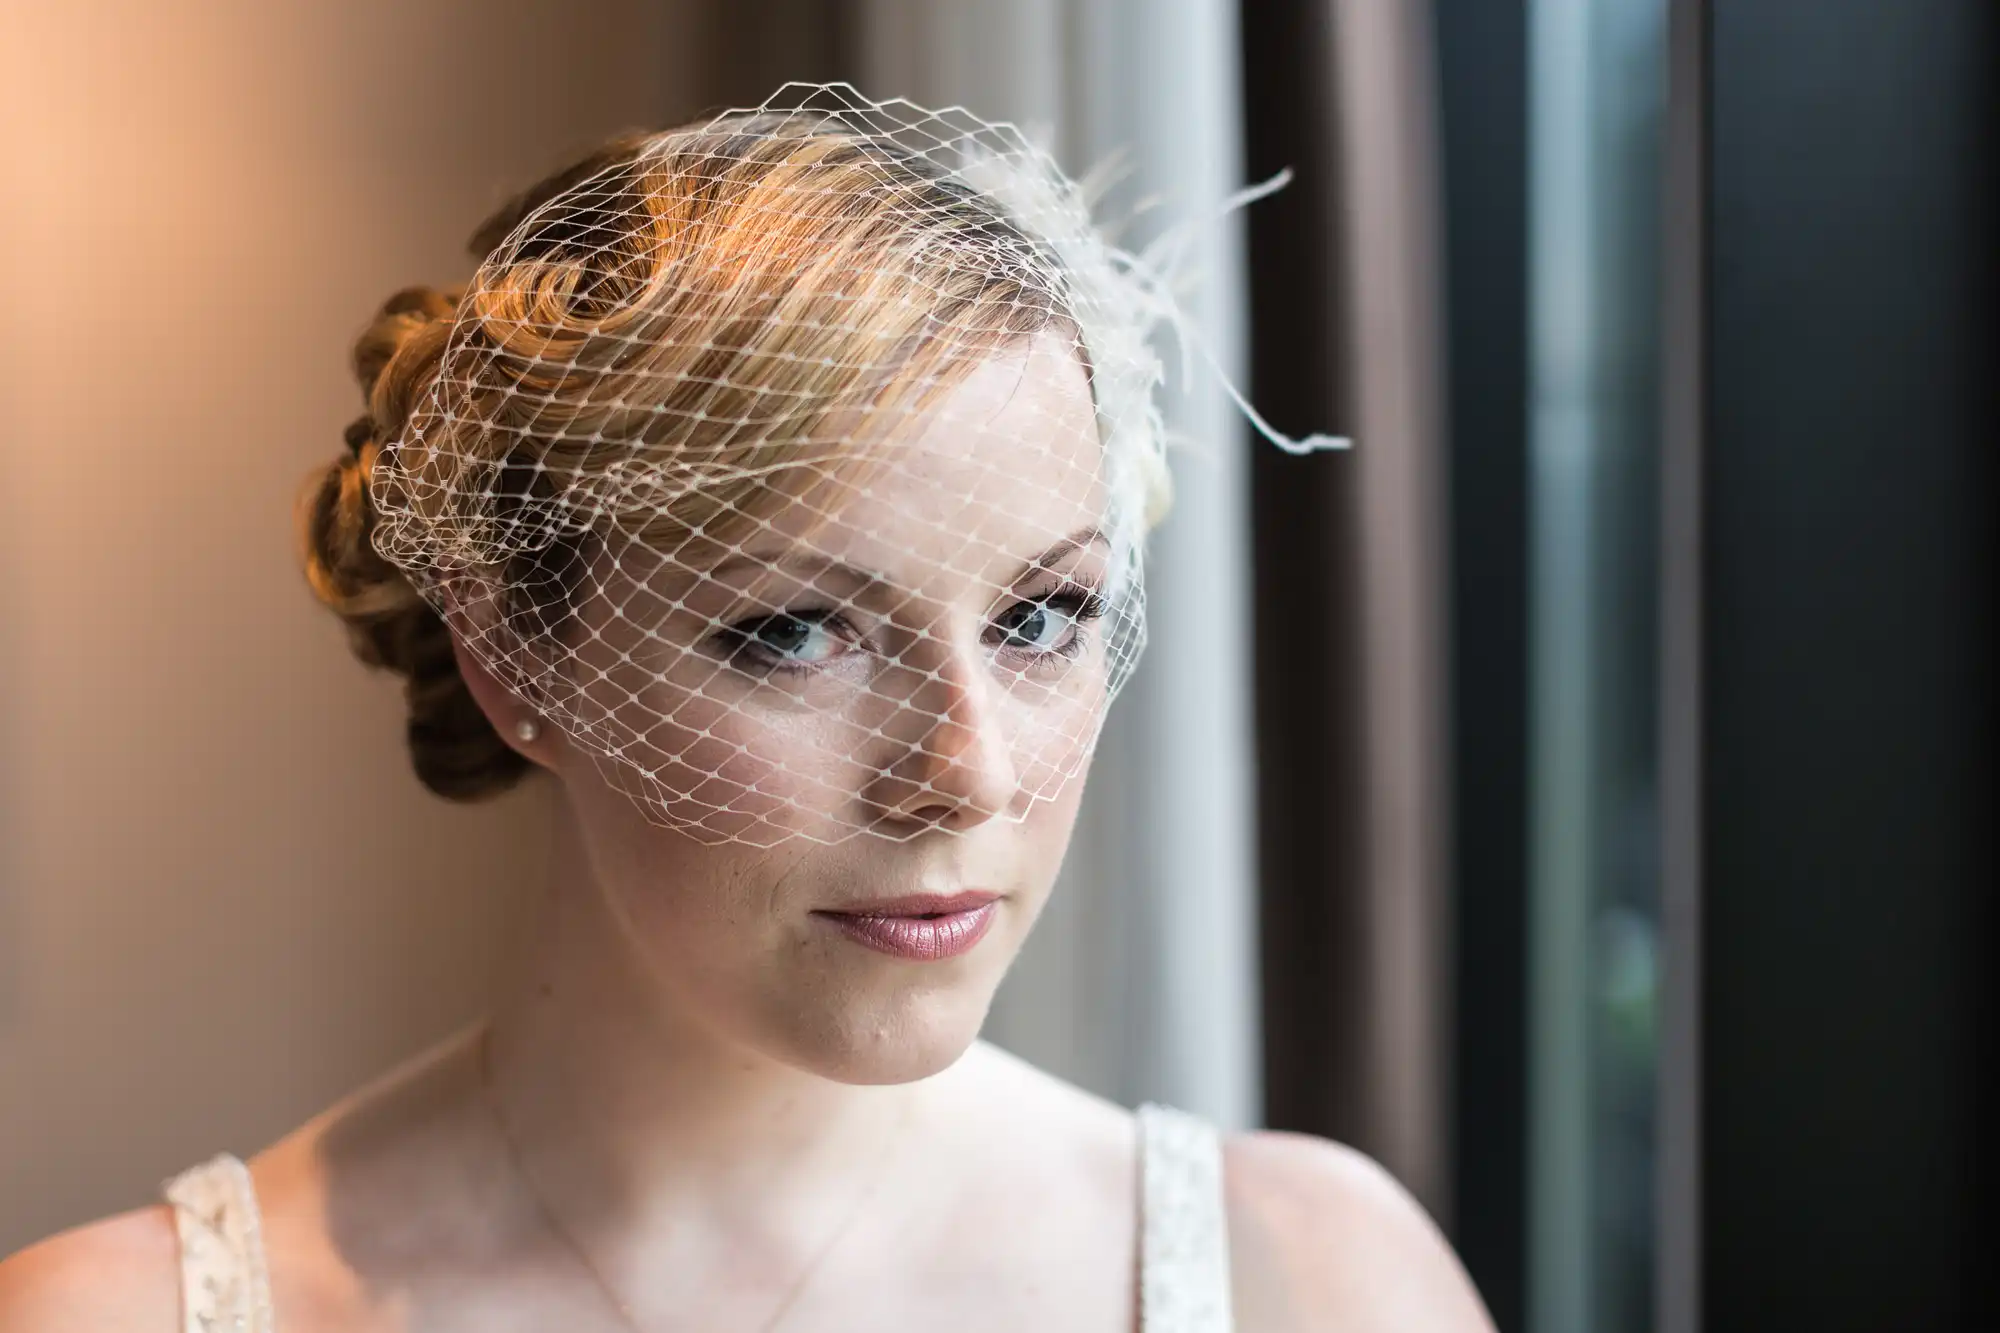 A bride wearing a veil gazes out a window, her elegant hairstyle and thoughtful expression captured in soft lighting.